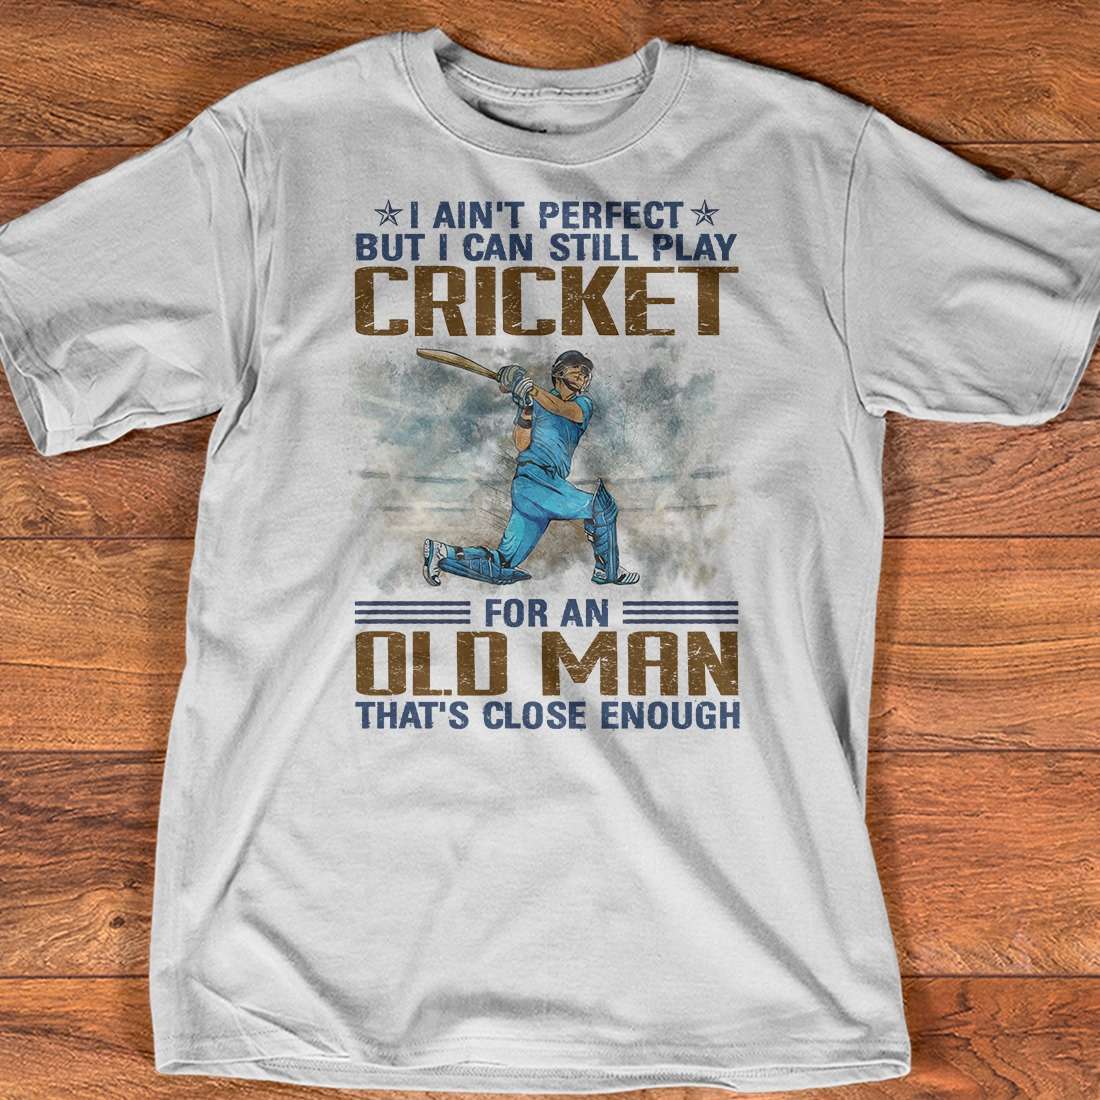 I ain't perfect but I can still play cricket for old man - Old man playing cricket, cricket player